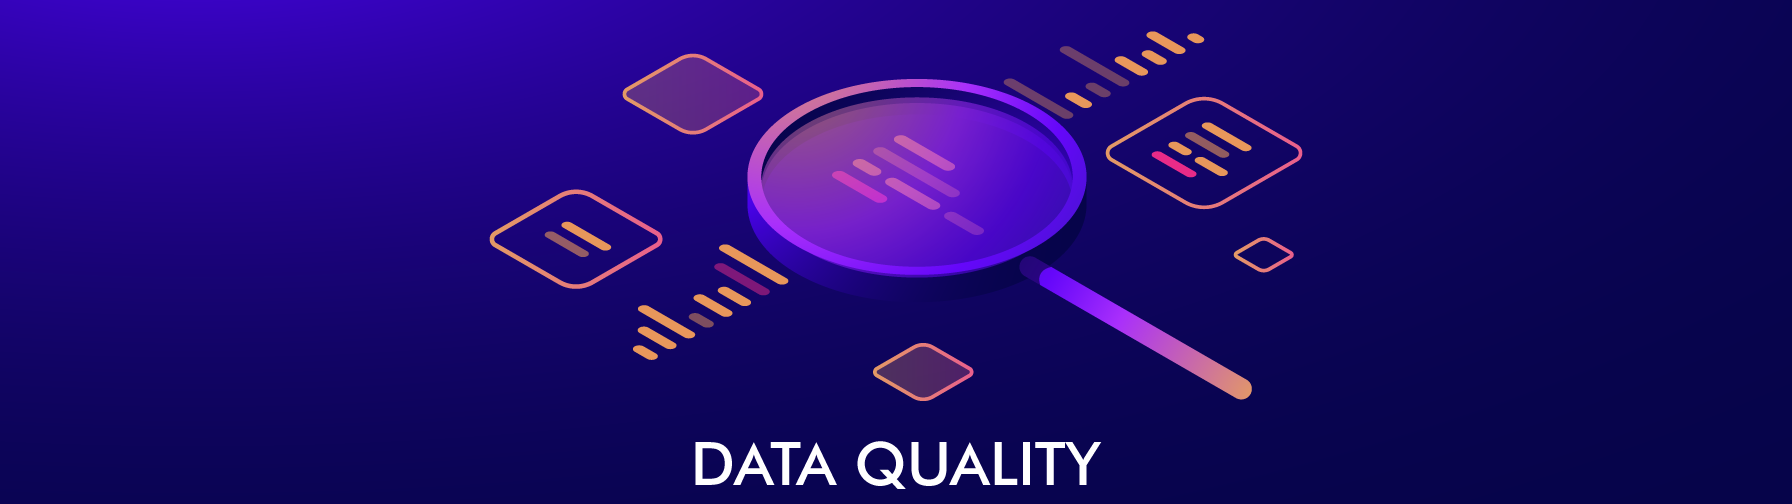 Why does one need clean, correct and quality data?